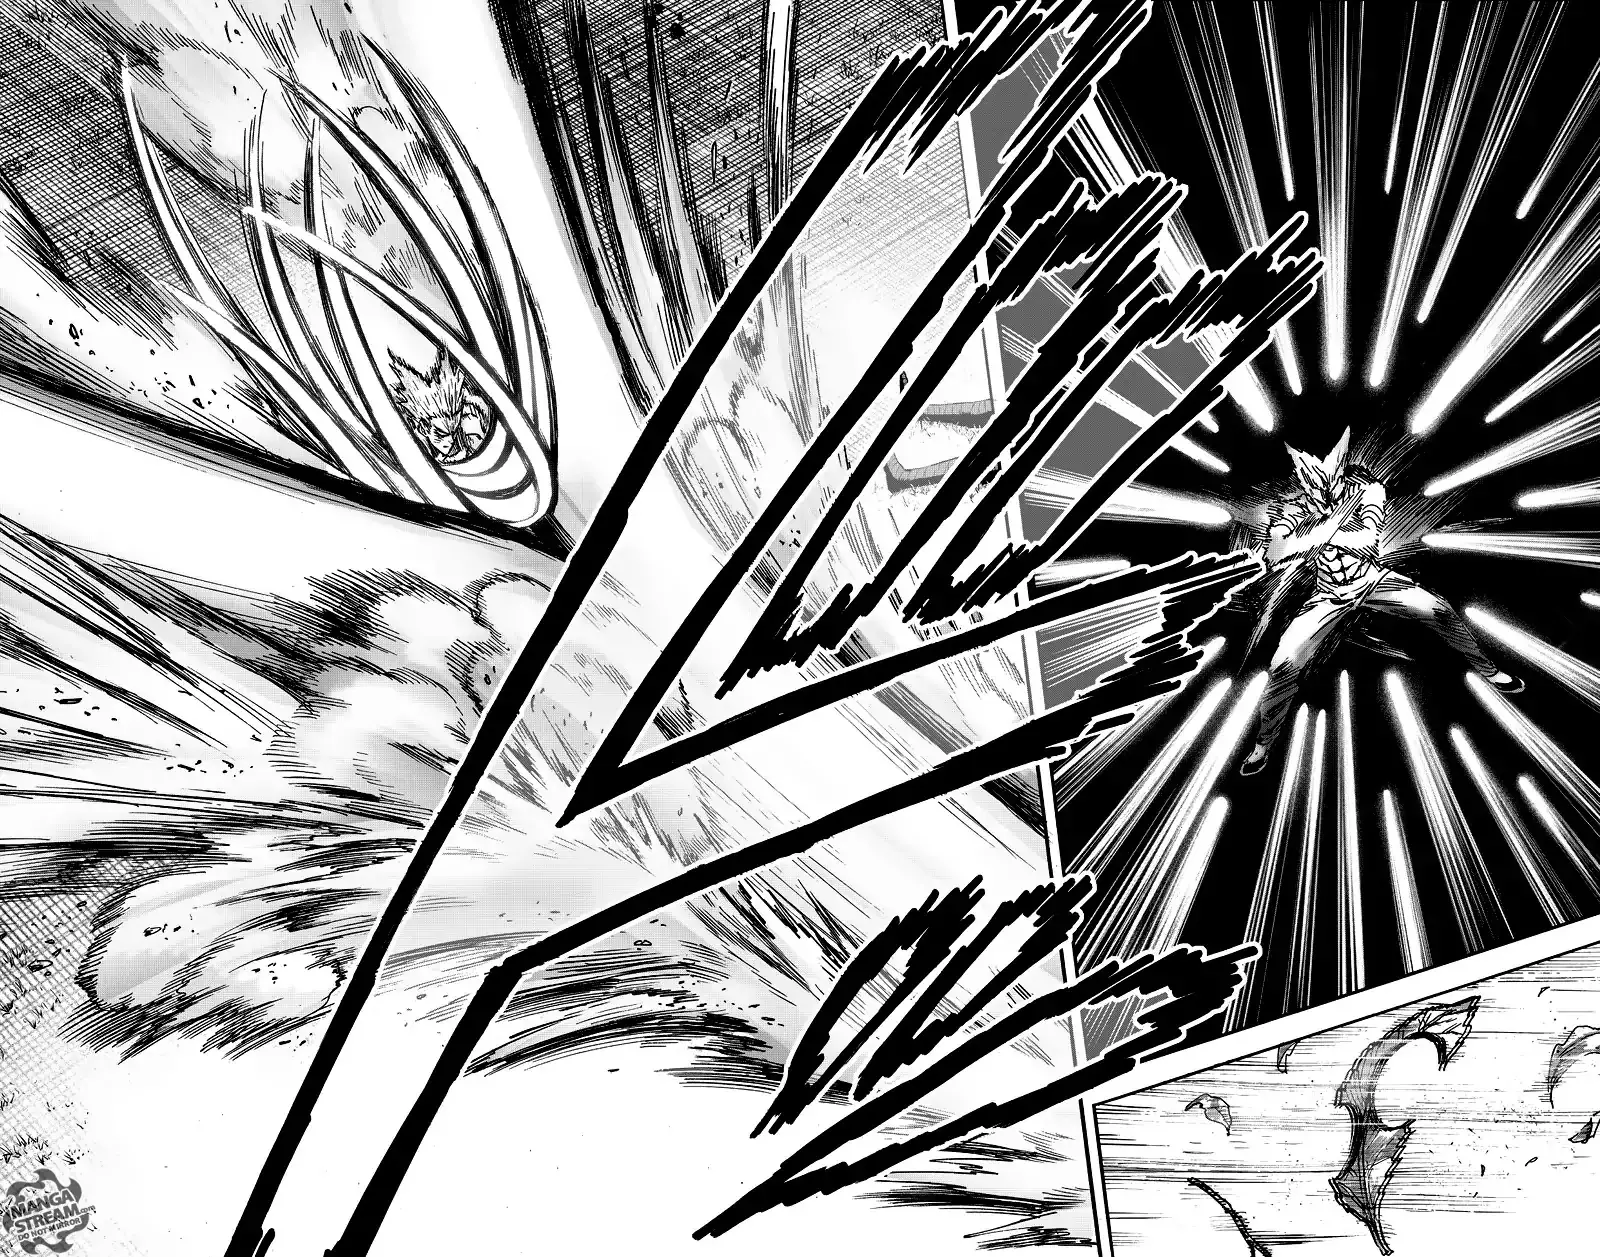 One Punch Man Chapter 82, READ One Punch Man Chapter 82 ONLINE, lost in the cloud genre,lost in the cloud gif,lost in the cloud girl,lost in the cloud goods,lost in the cloud goodreads,lost in the cloud,lost ark cloud gaming,lost odyssey cloud gaming,lost in the cloud fanart,lost in the cloud fanfic,lost in the cloud fandom,lost in the cloud first kiss,lost in the cloud font,lost in the cloud ending,lost in the cloud episode 97,lost in the cloud edit,lost in the cloud explained,lost in the cloud dog,lost in the cloud discord server,lost in the cloud desktop wallpaper,lost in the cloud drawing,can't find my cloud on network,lost in the cloud characters,lost in the cloud chapter 93 release date,lost in the cloud birthday,lost in the cloud birthday art,lost in the cloud background,lost in the cloud banner,lost in the clouds meaning,what is the black cloud in lost,lost in the cloud ao3,lost in the cloud anime,lost in the cloud art,lost in the cloud author twitter,lost in the cloud author instagram,lost in the cloud artist,lost in the cloud acrylic stand,lost in the cloud artist twitter,lost in the cloud art style,lost in the cloud analysis